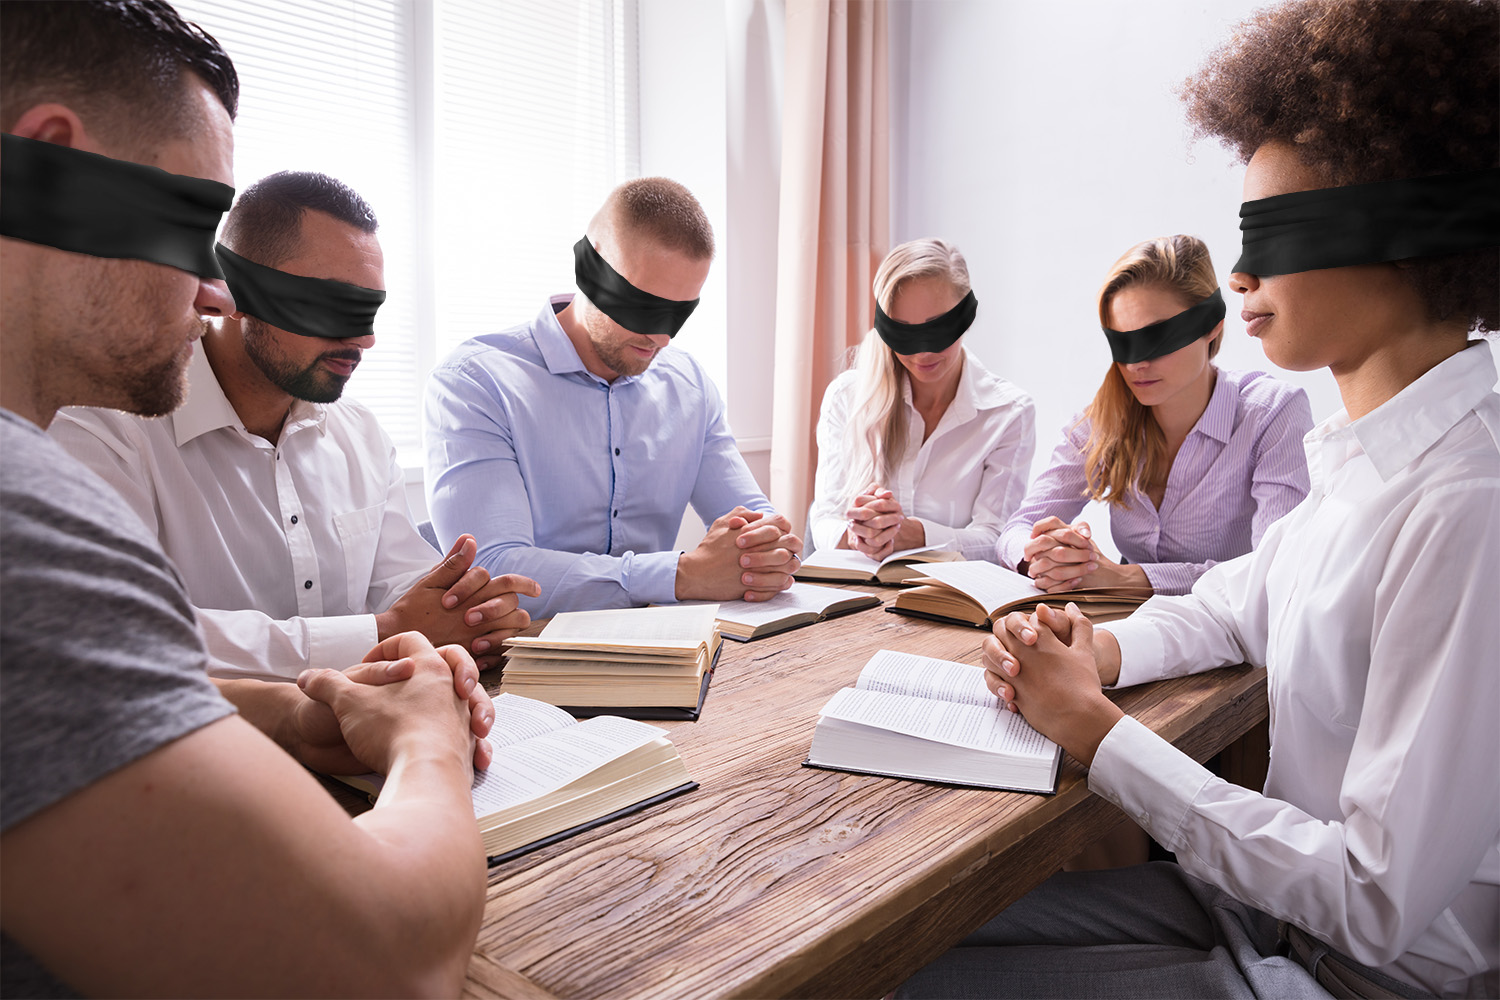 The Blindfolds and Veils Satan Uses to Blind the World